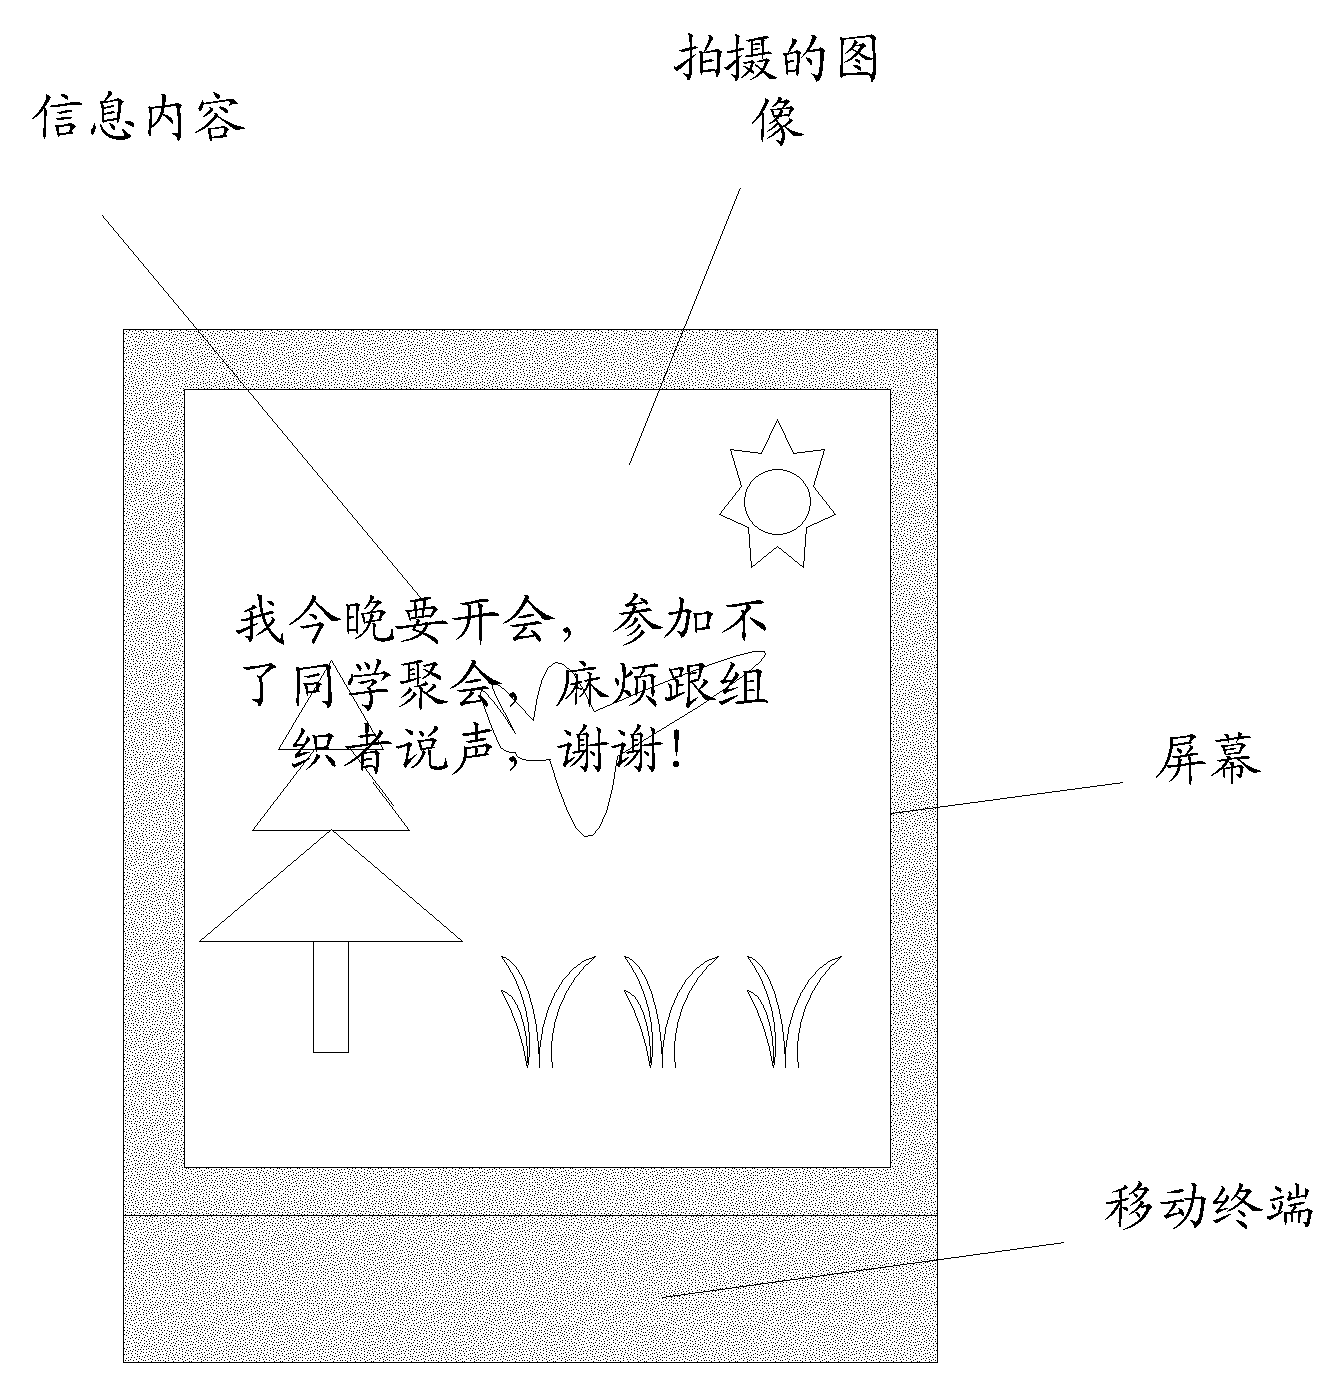 Information display method and system for mobile terminal and mobile terminal